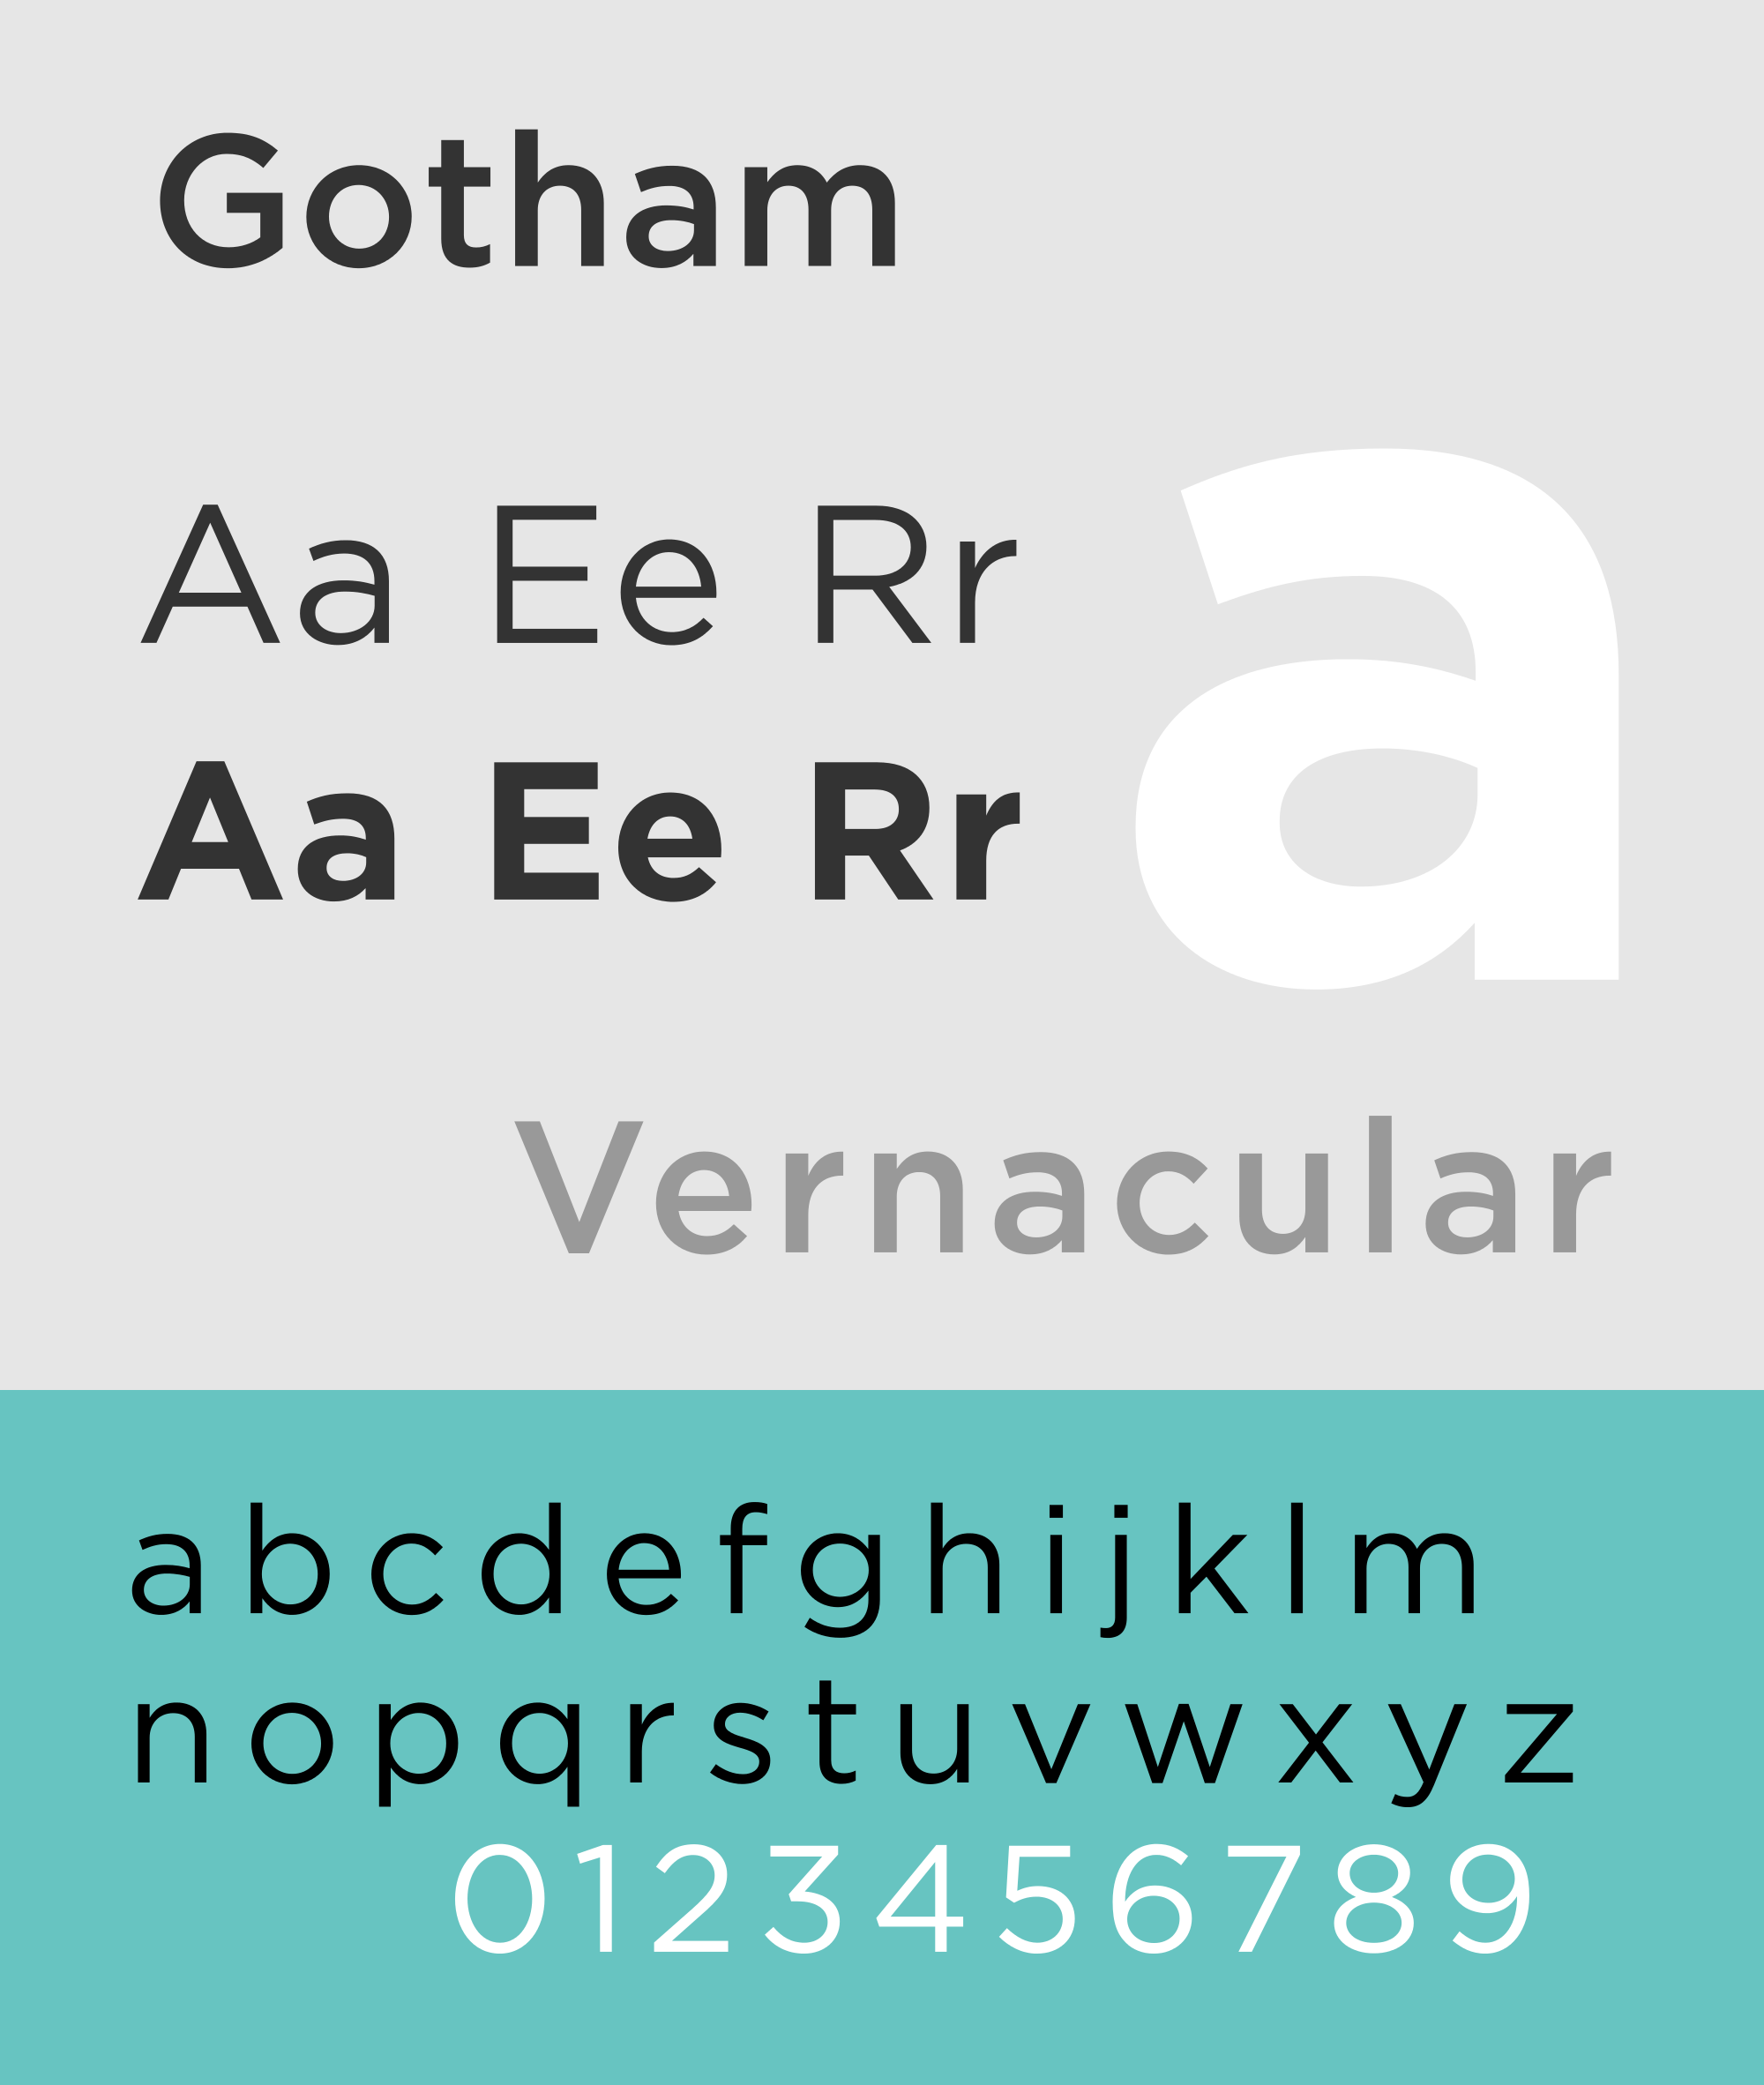 25 most used typefaces in advertising: Gotham